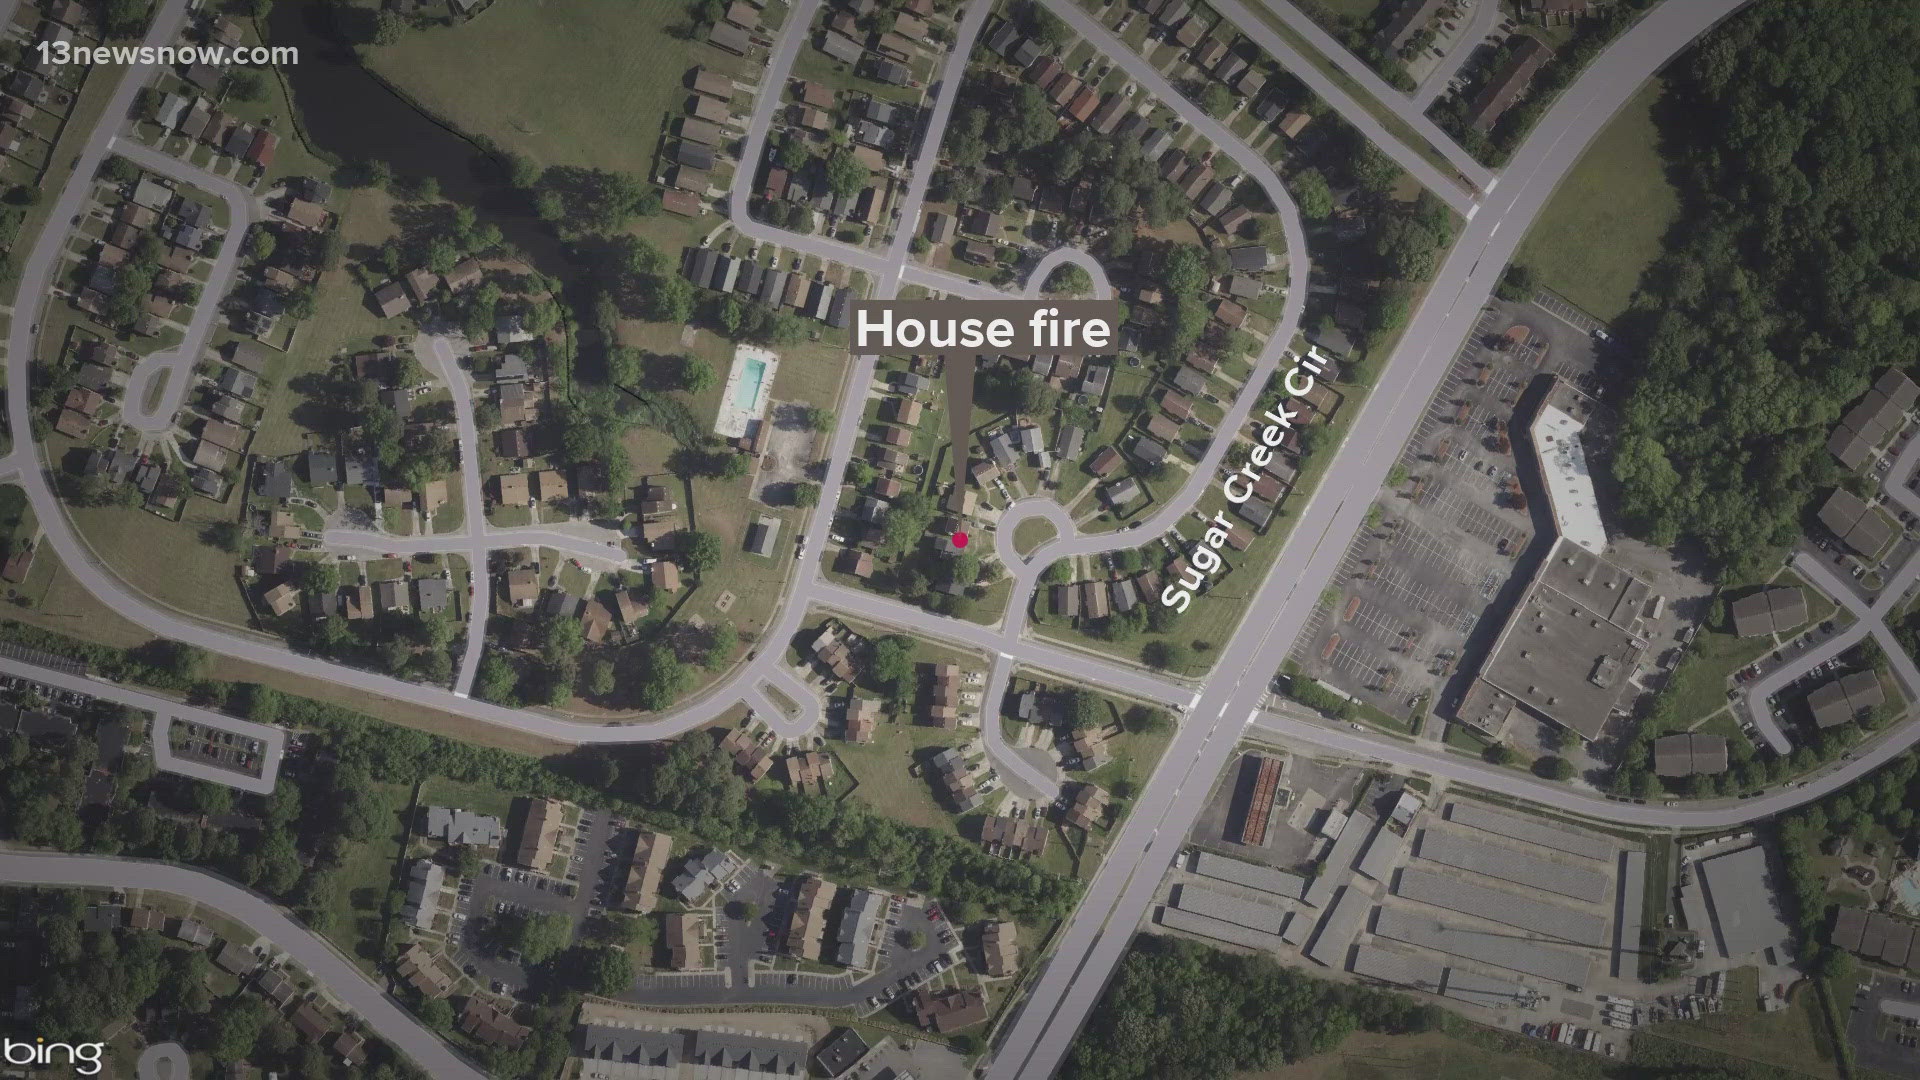 The fire started at a home on Sugar Creek Circle around 6:30 p.m.